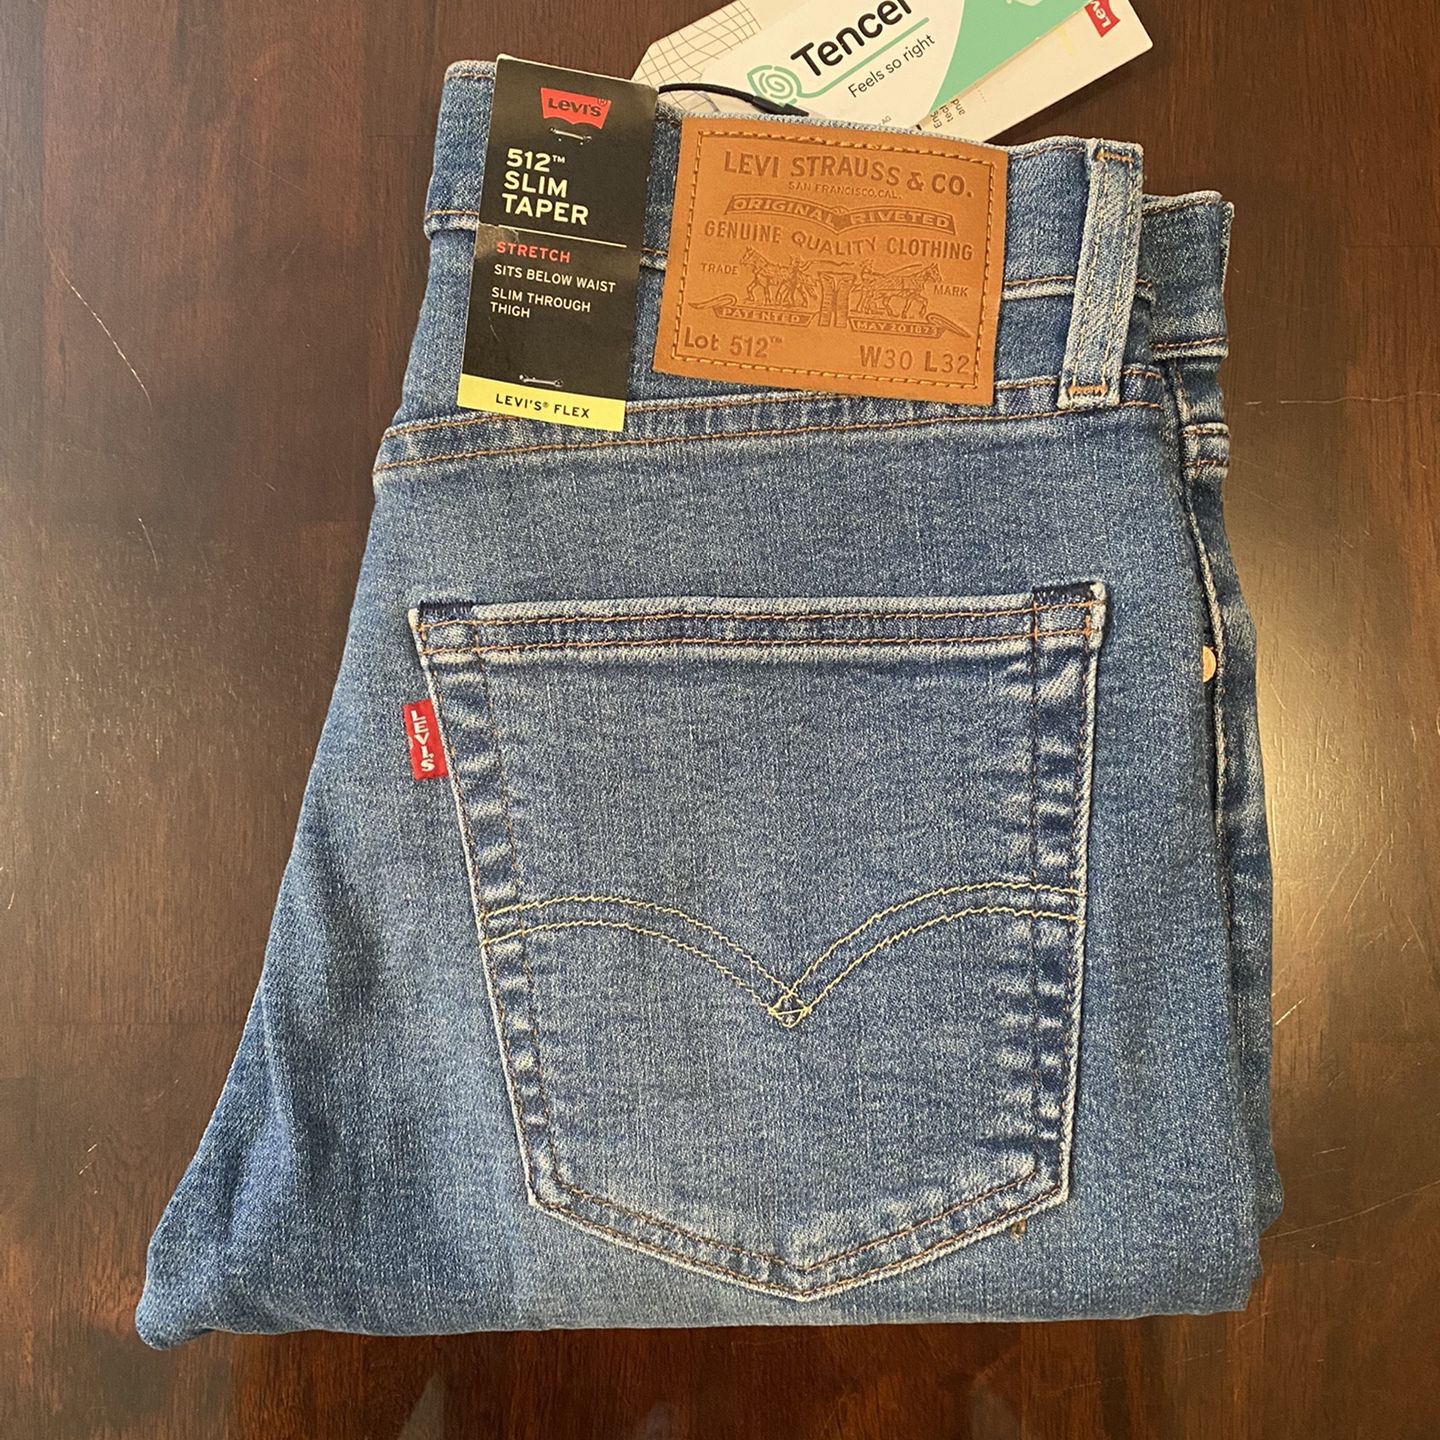 Levi's 512 Jeans Slim-Tapered Size 30x32 Men for Sale in Cty Of Cmmrce, CA  - OfferUp